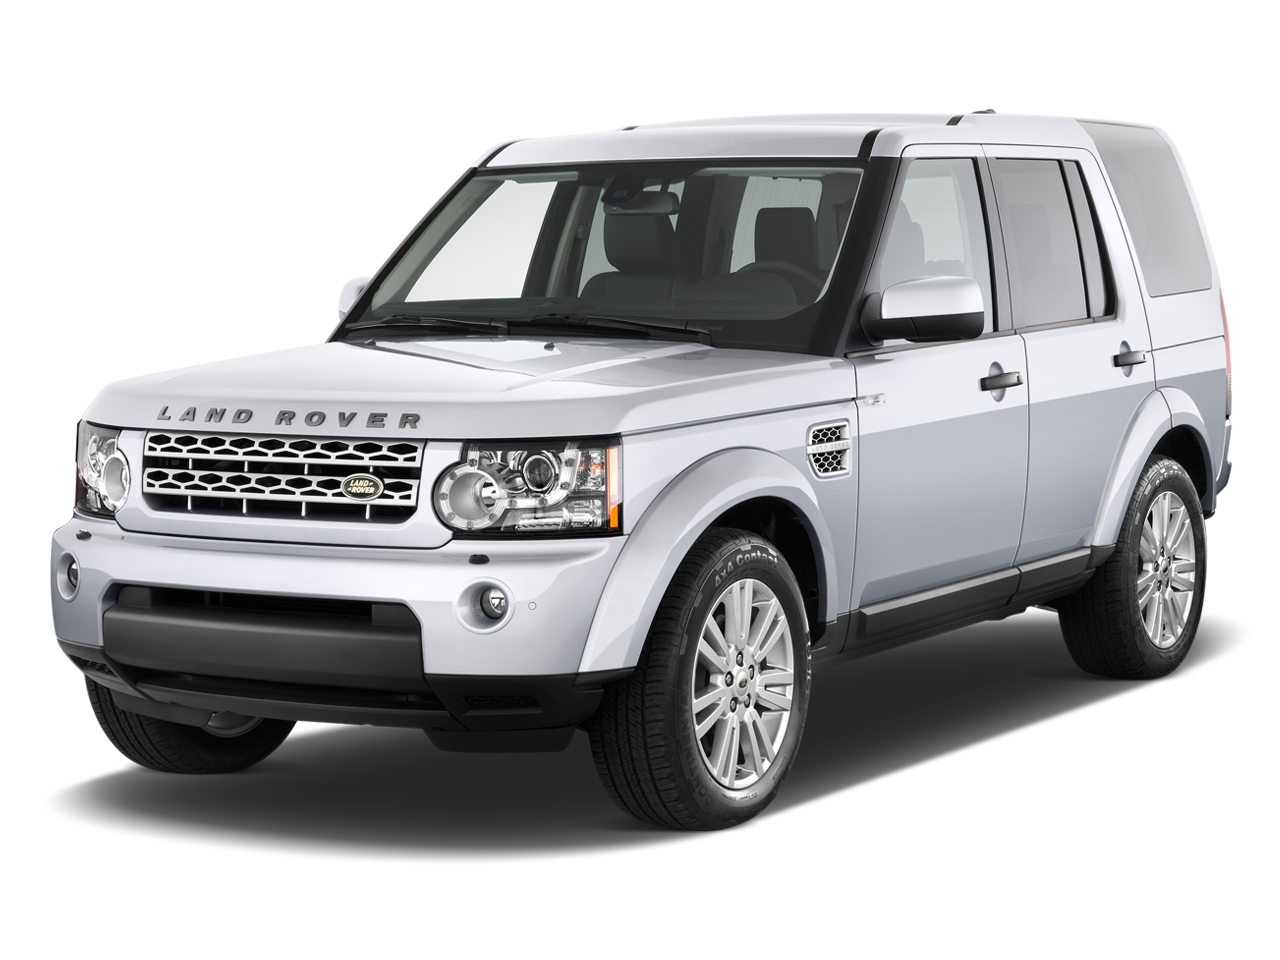 2011 Land Rover Lr4 Review Ratings Specs Prices And